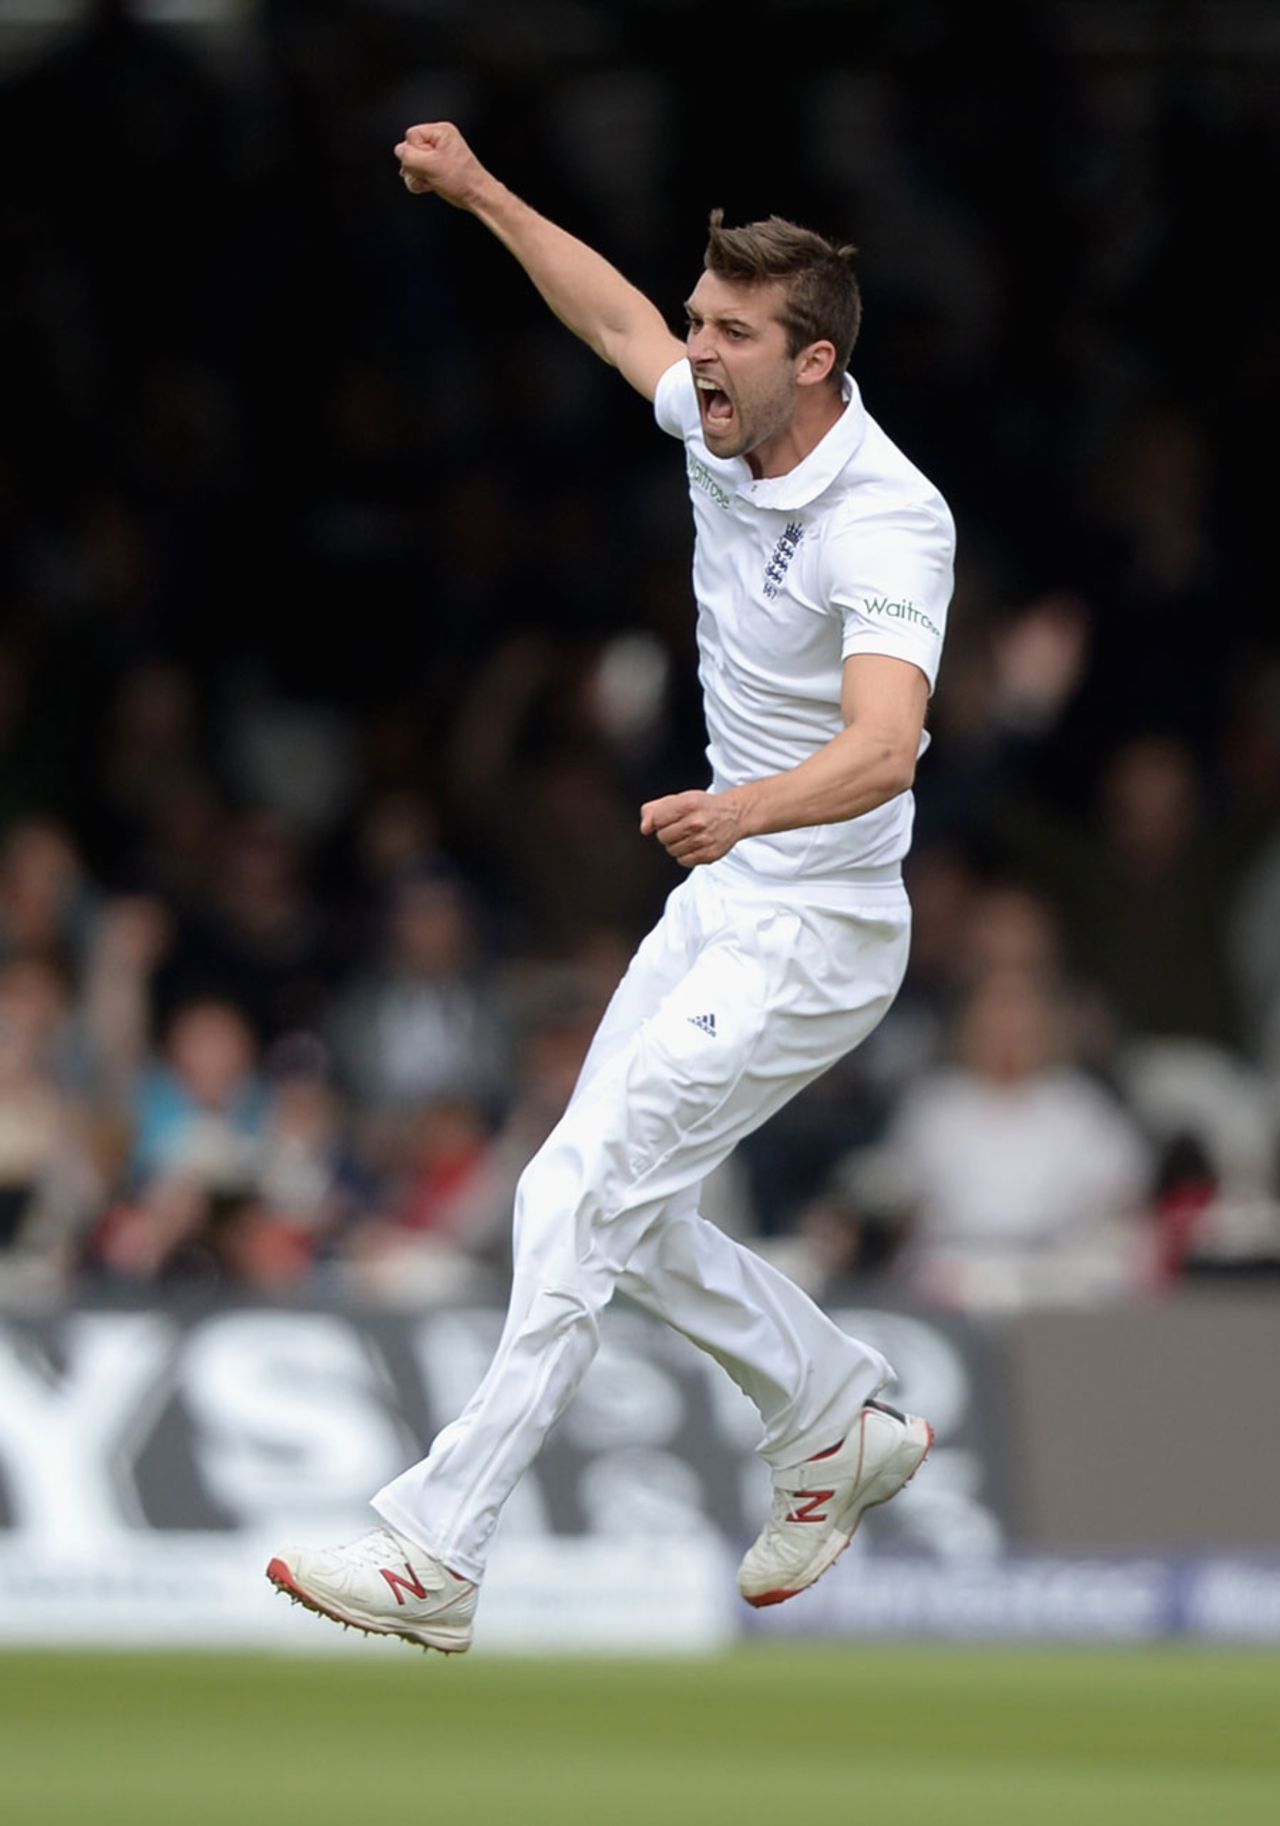 Mark Wood leaps in celebration after dismissing BJ Watling, England v New Zealand, 1st Investec Test, Lord's, 5th day, May 25, 2015